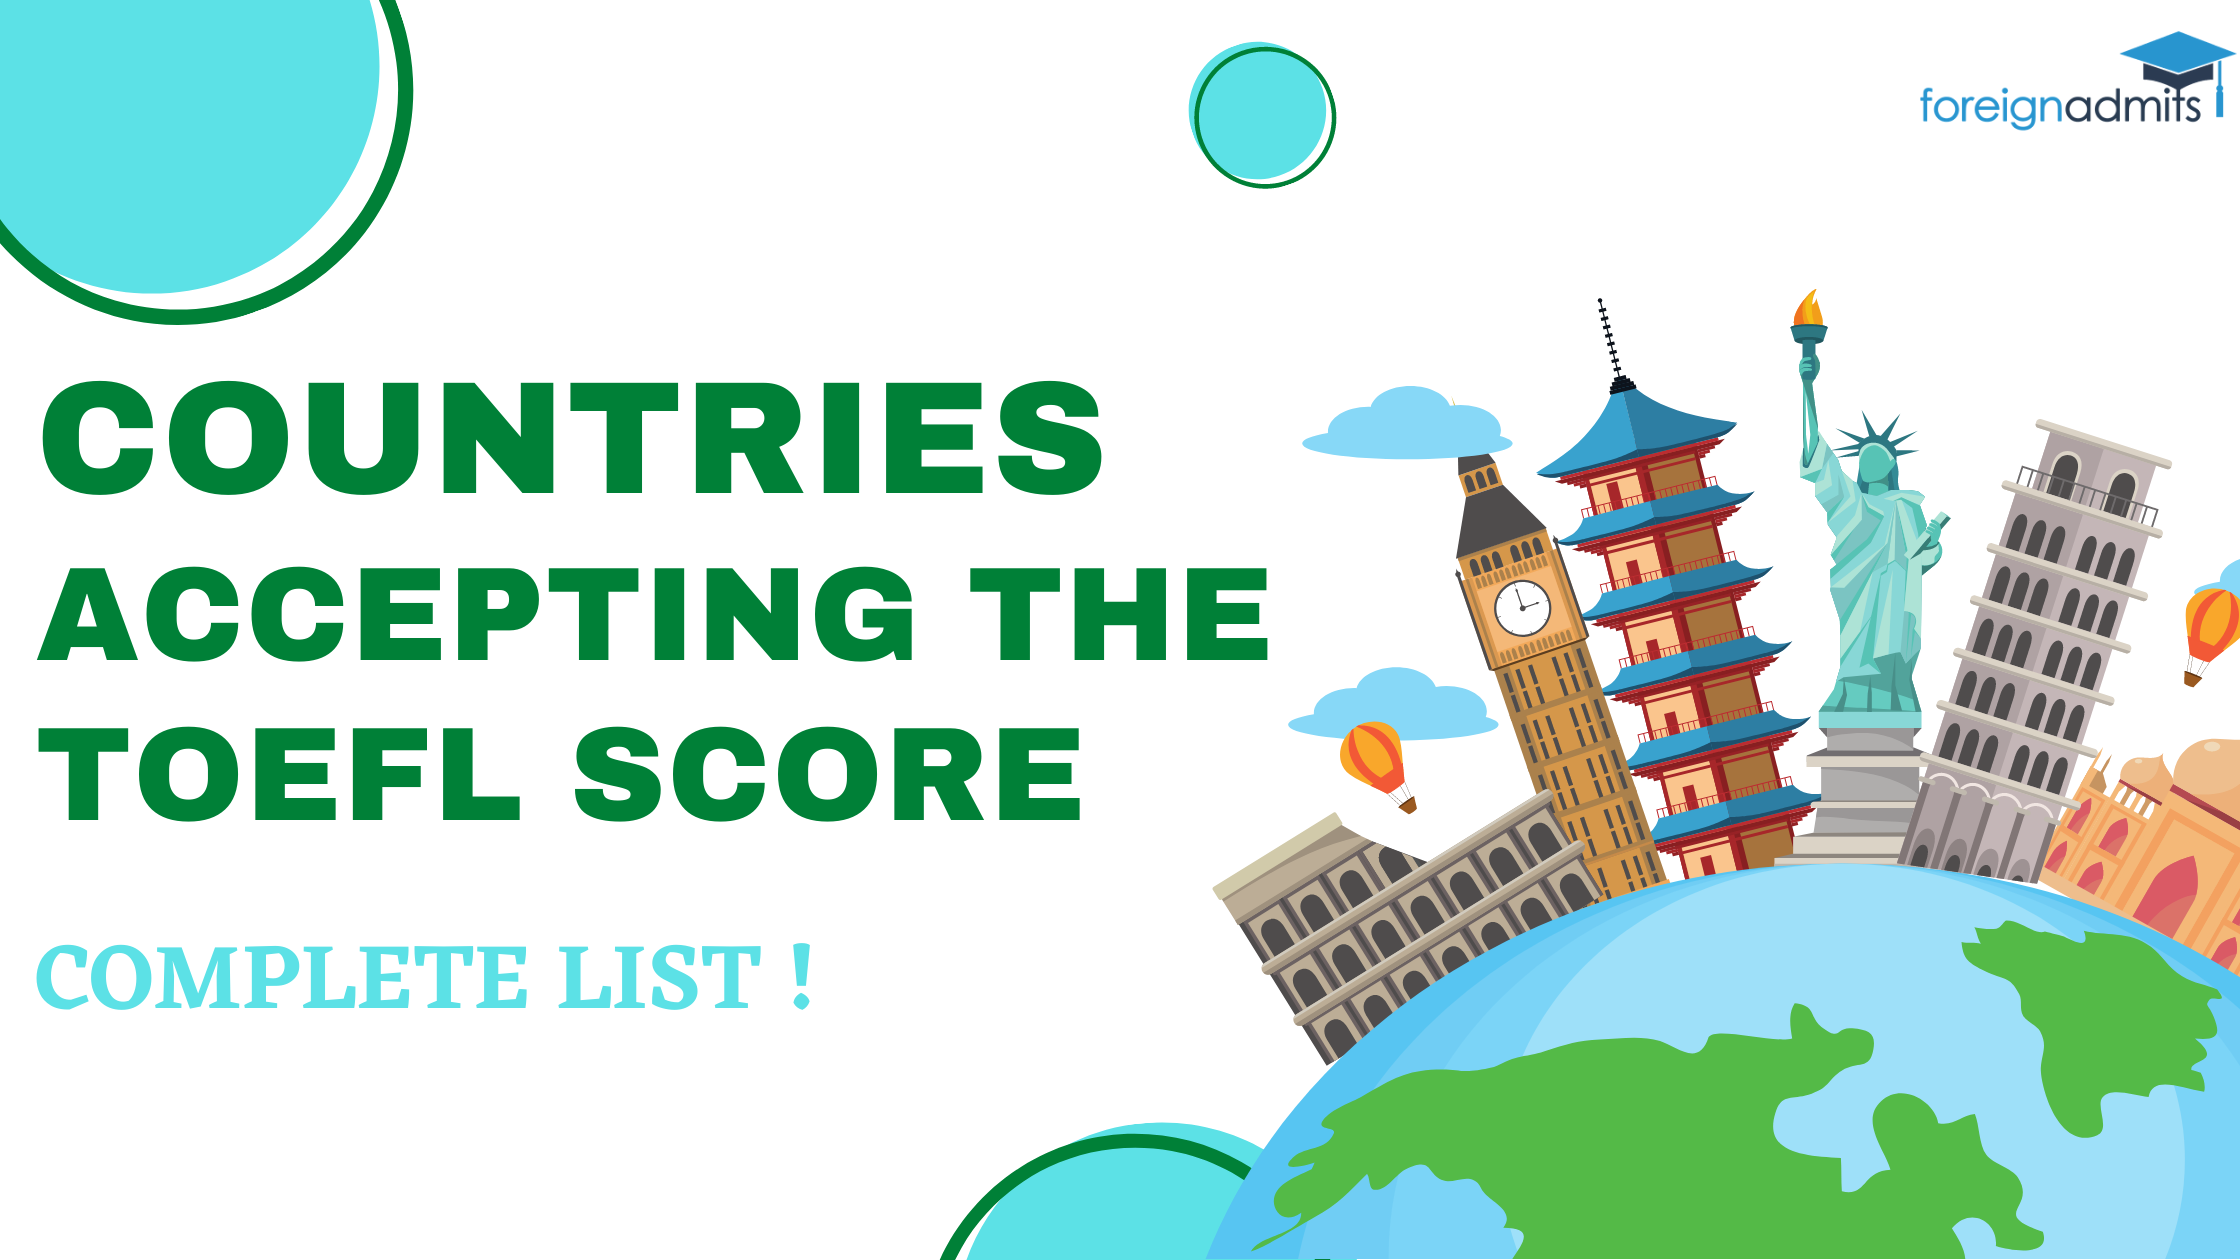 TOEFL Scores Accepting Countries List